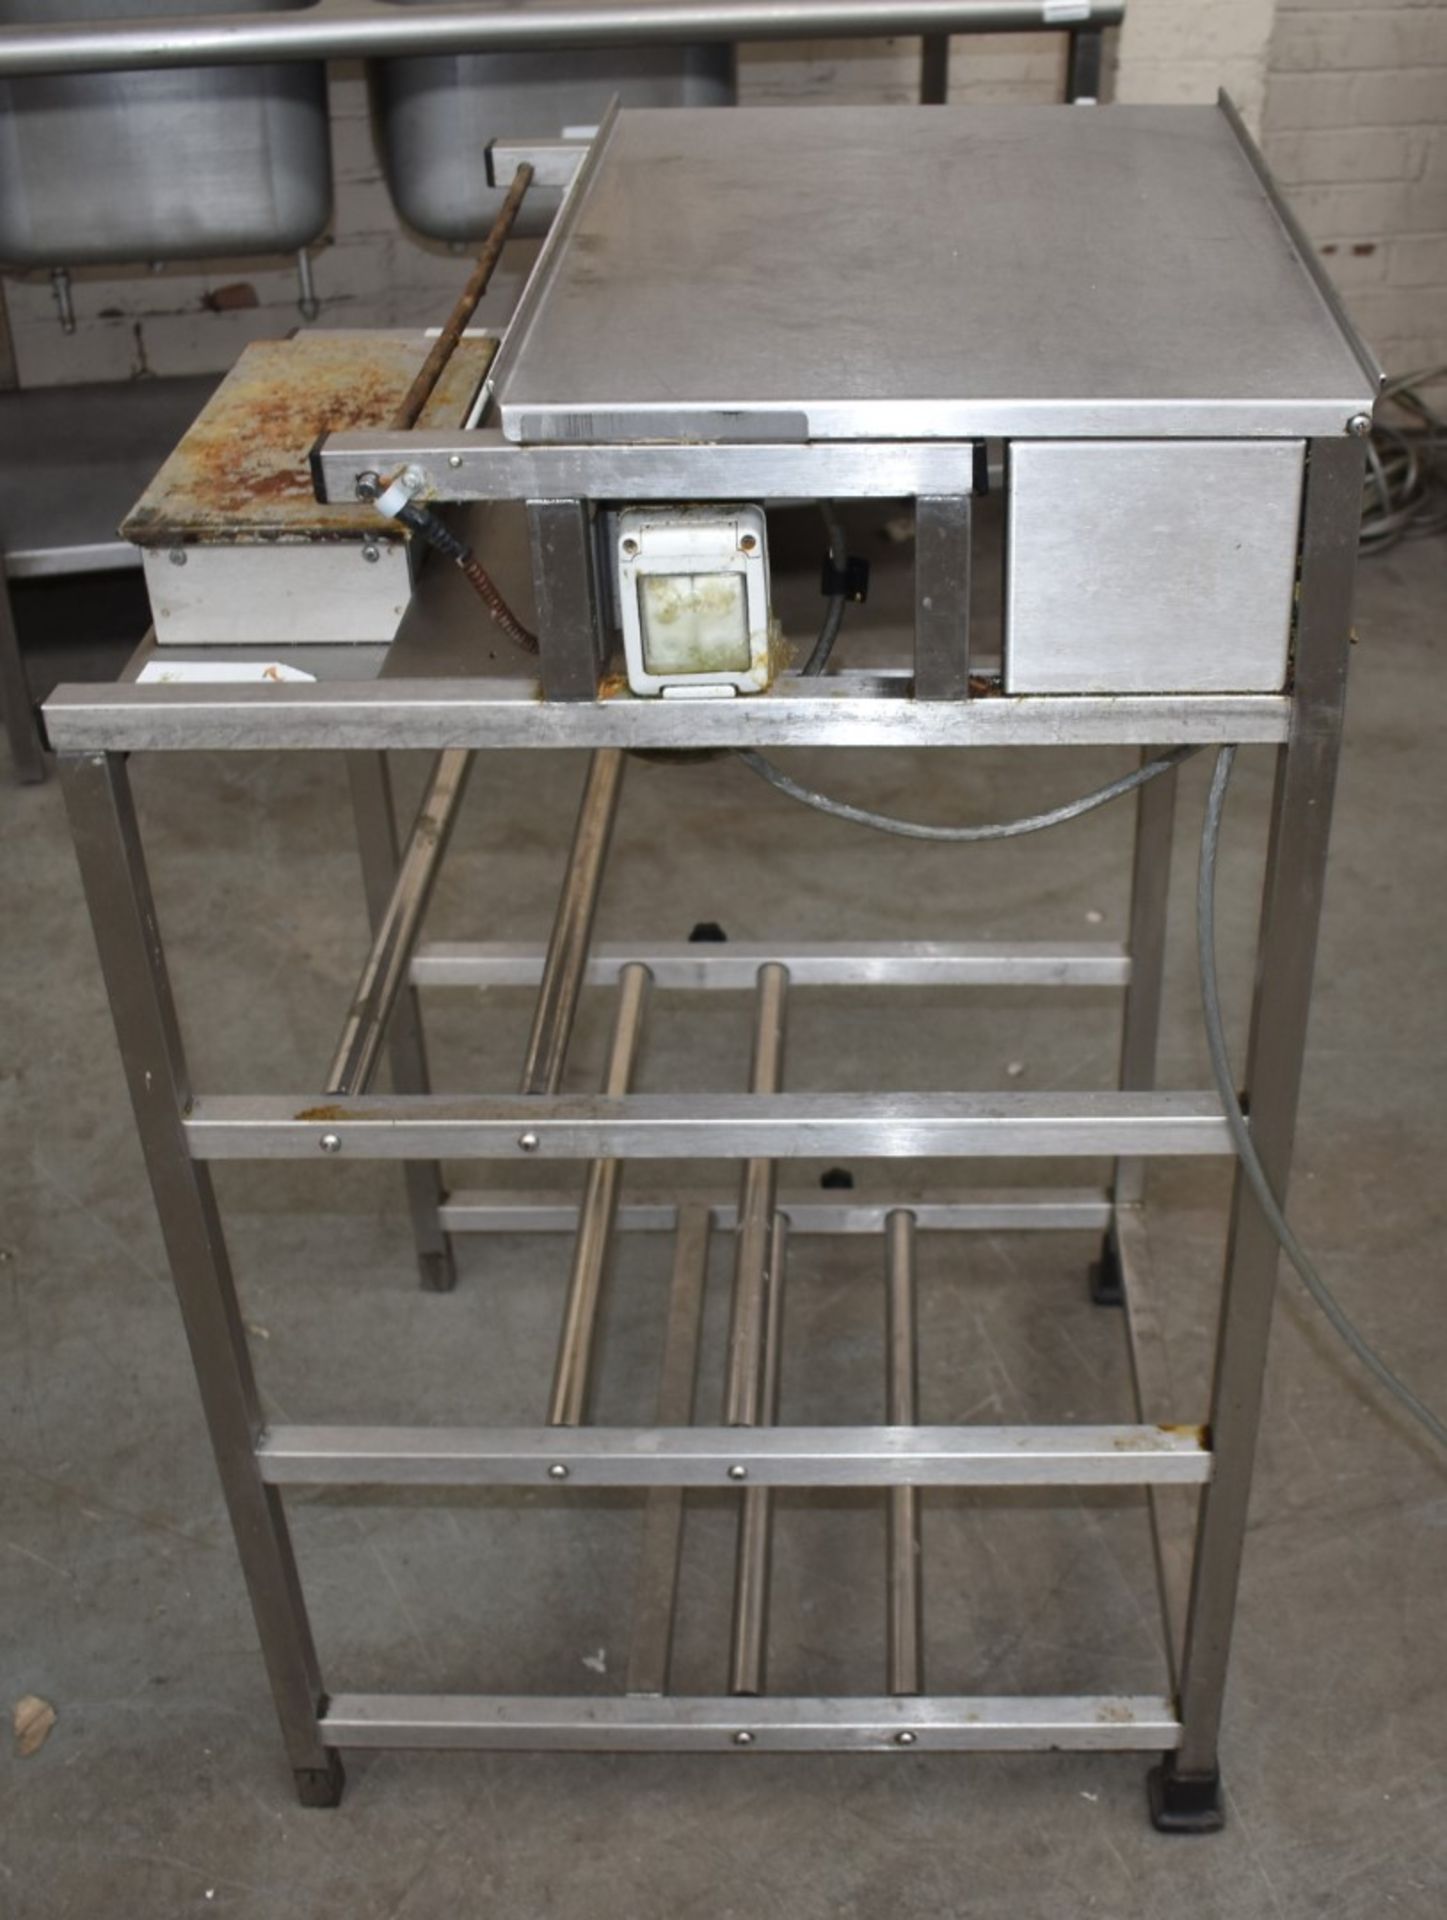 1 x Food Tray Wrapper Unit For Heat Sealed Wrapping - Dimensions: W56 cms - 240v - Ref: CAM112 WH4 - - Image 3 of 5